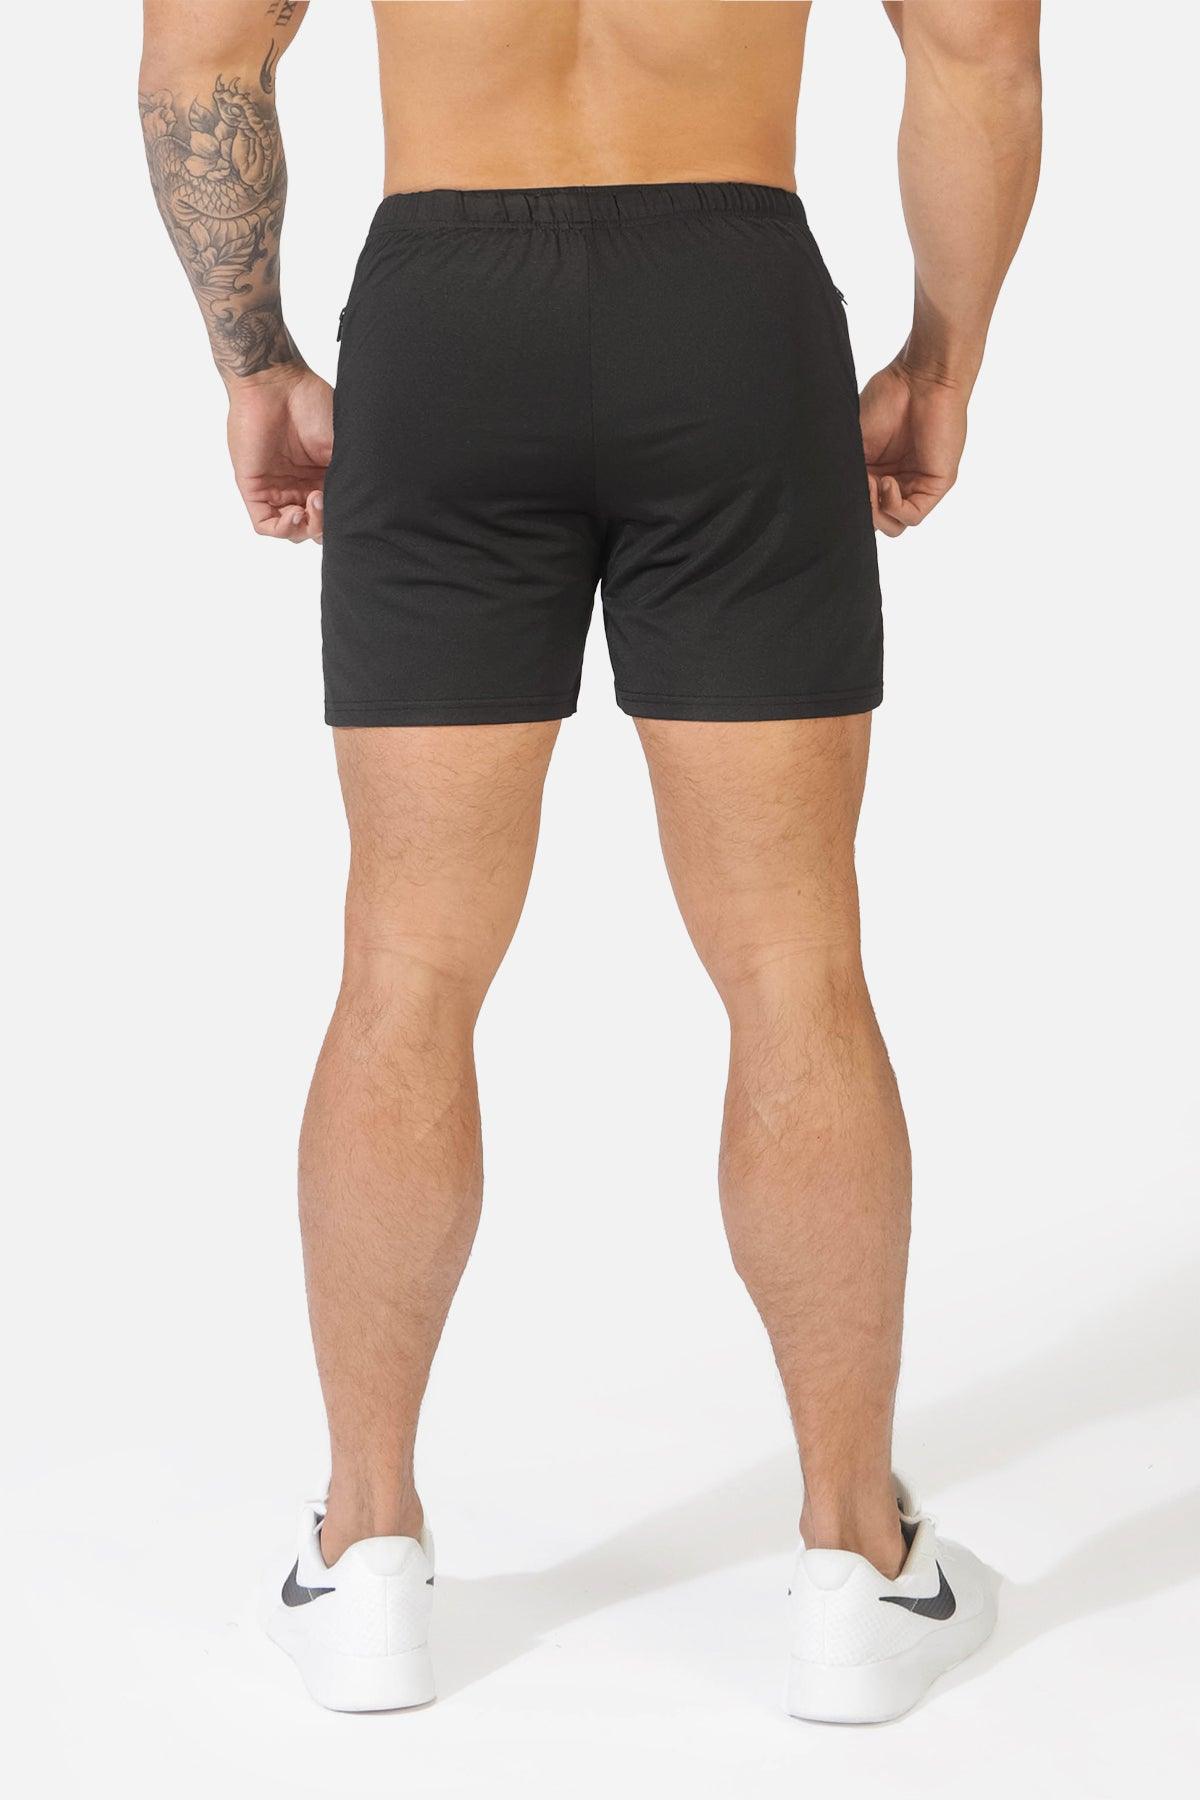 Athletic Workout Shorts with Zipper Pockets - Sweat Wicking Gym